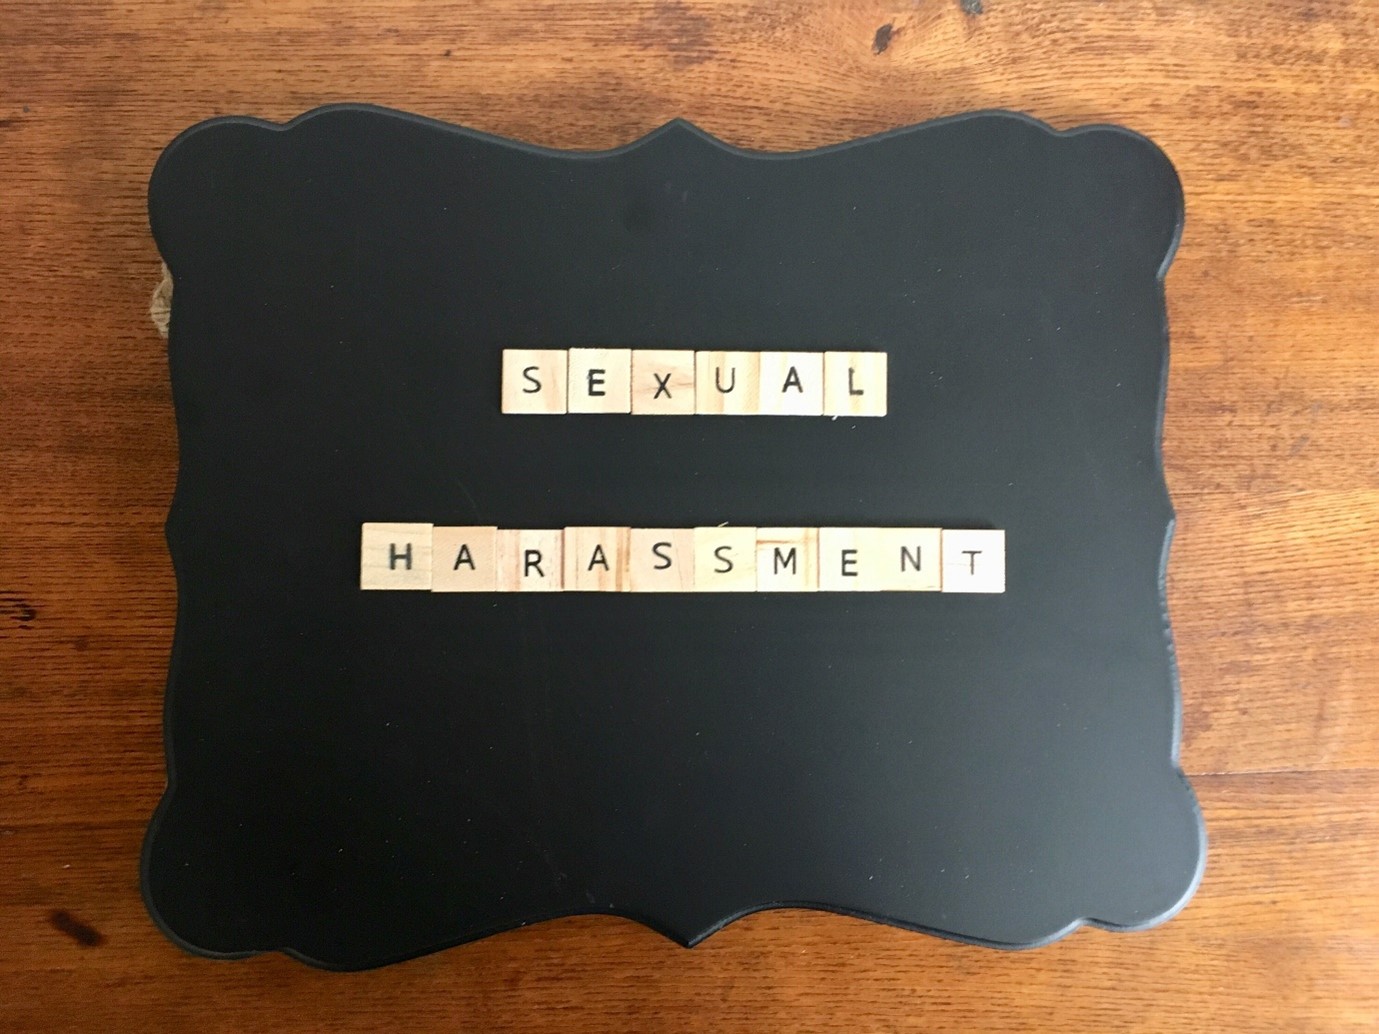 Transforming workplace culture: Tackling sexual harassment through training